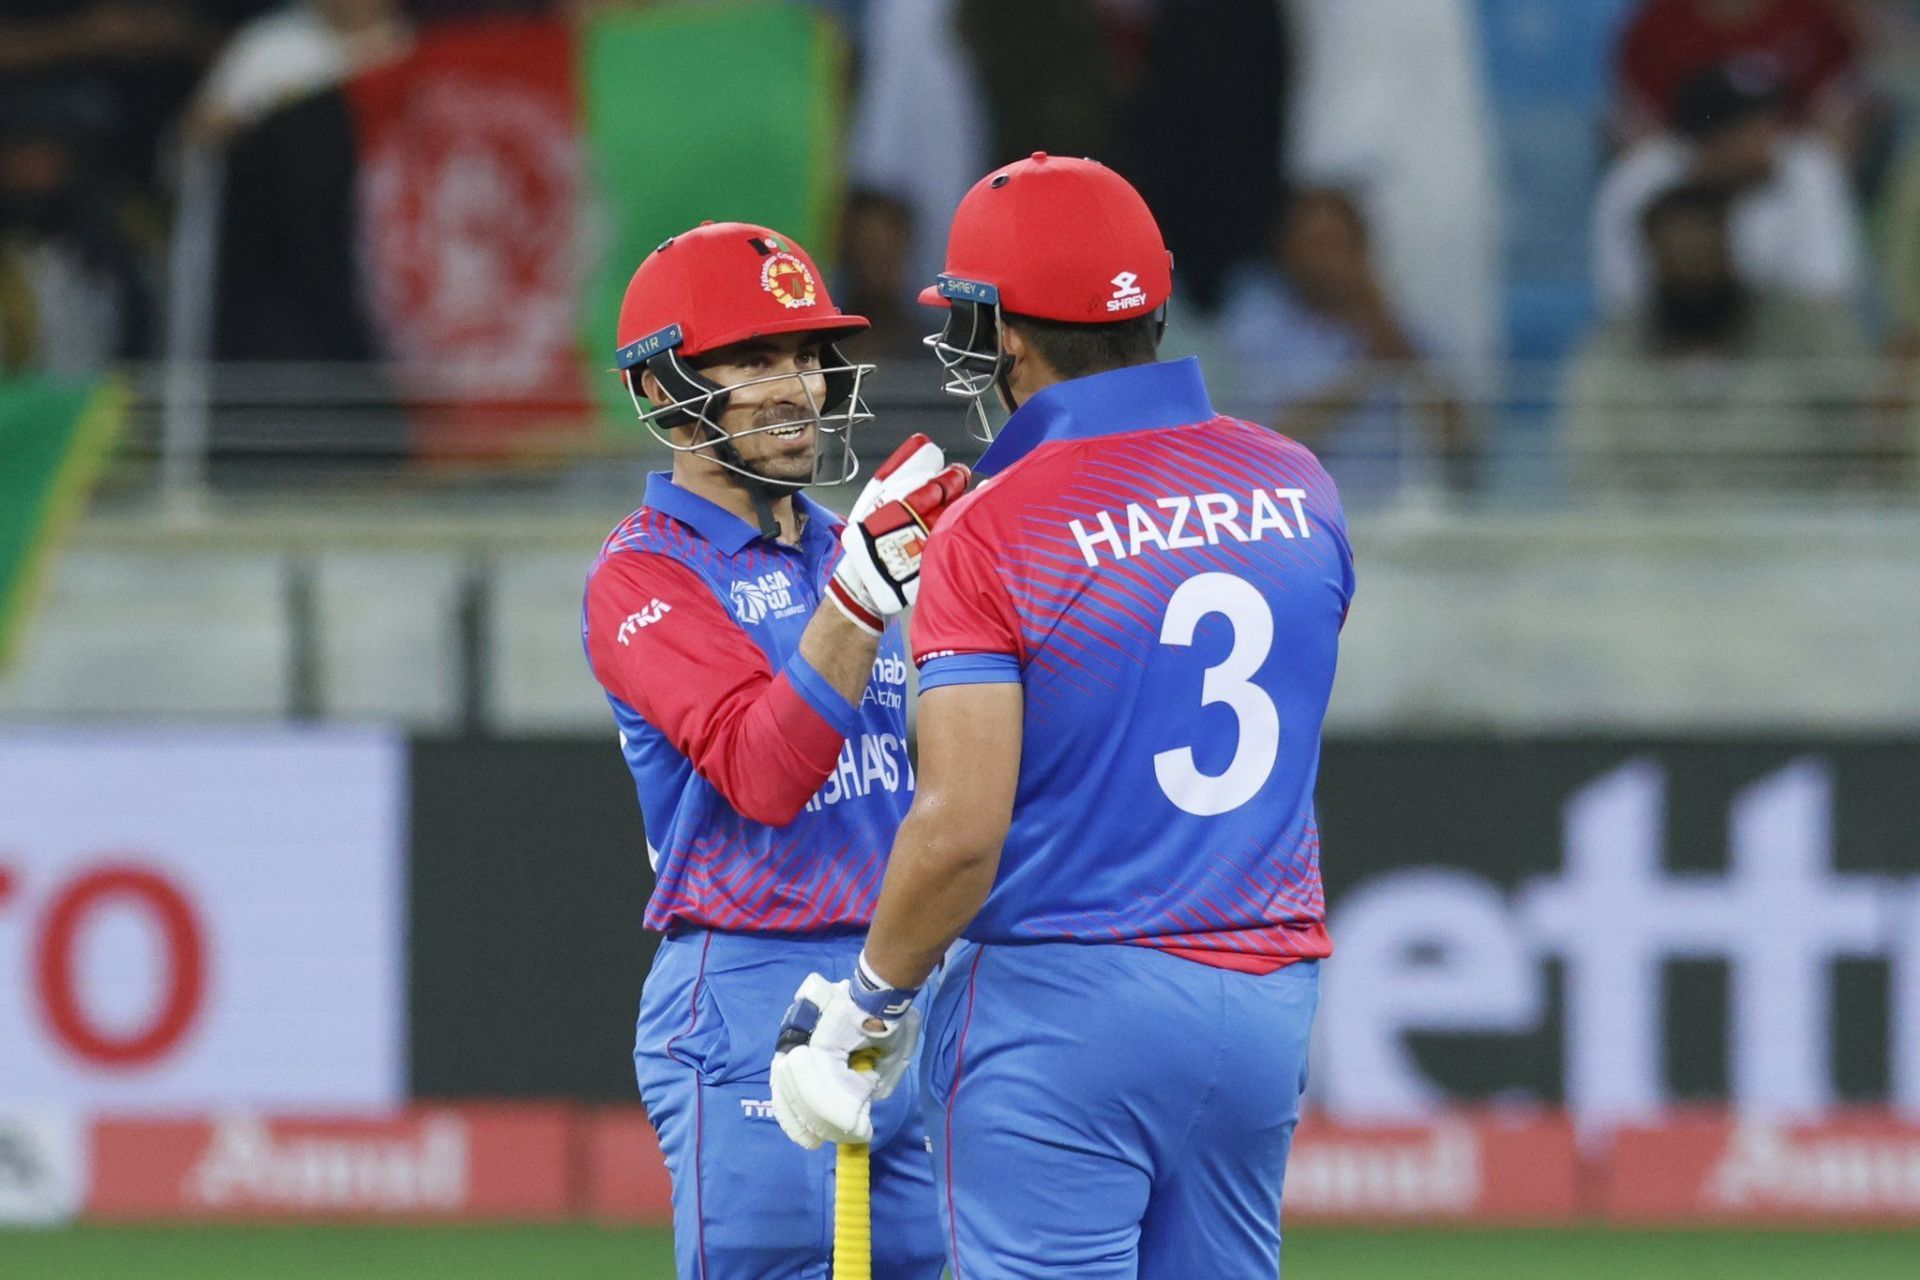 Afghanistan defeated Sri Lanka in their last game on Saturday 